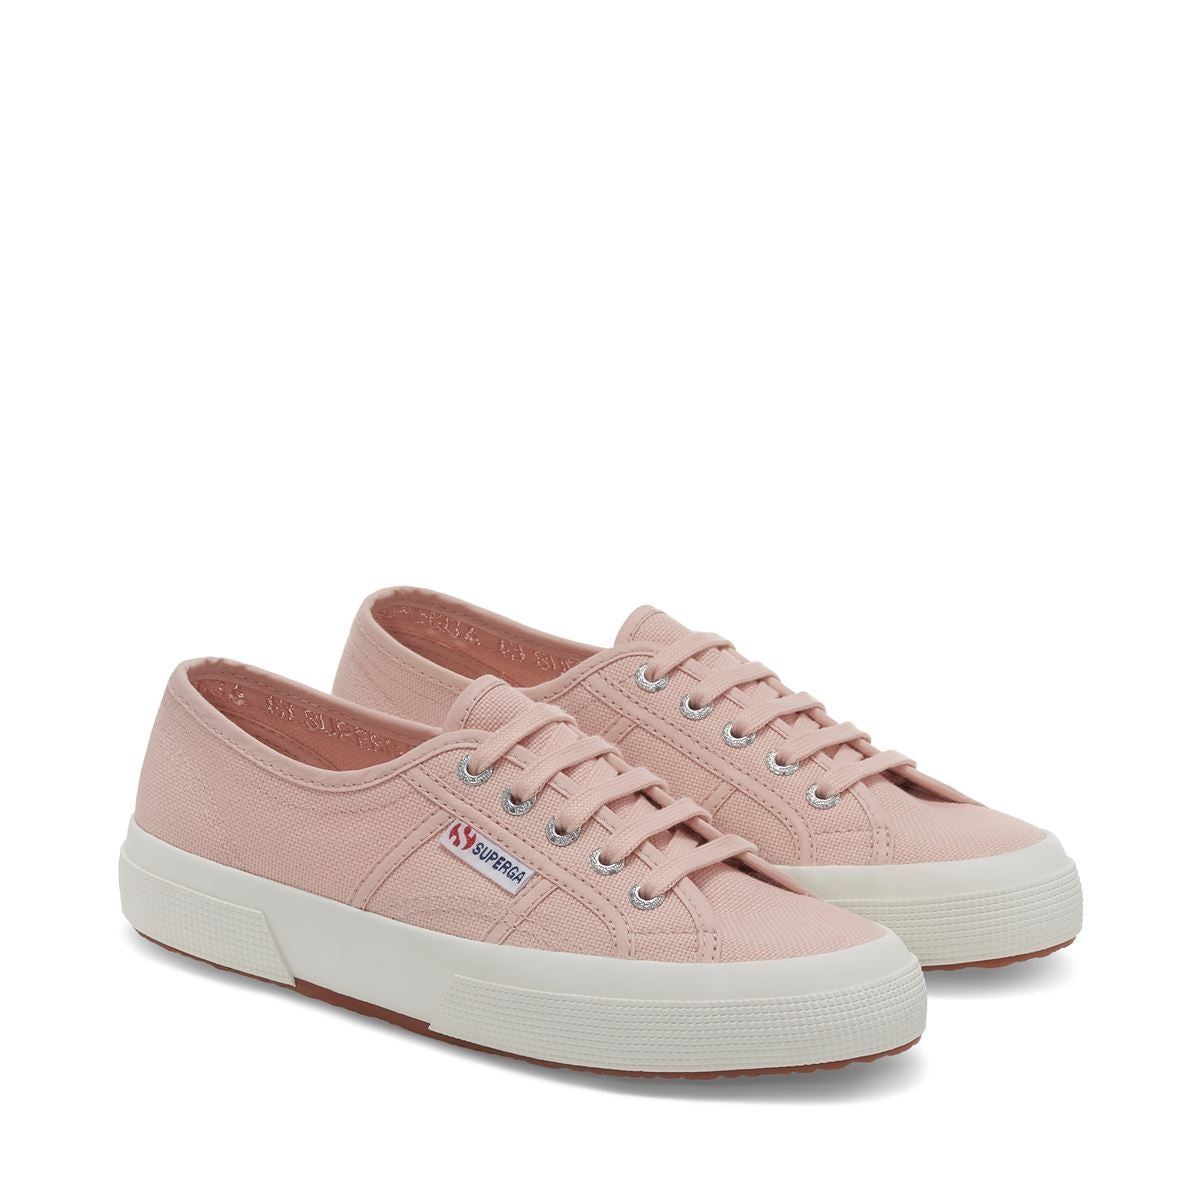 2750 Cotu Classic Sneakers Pink Blush- Hover Image